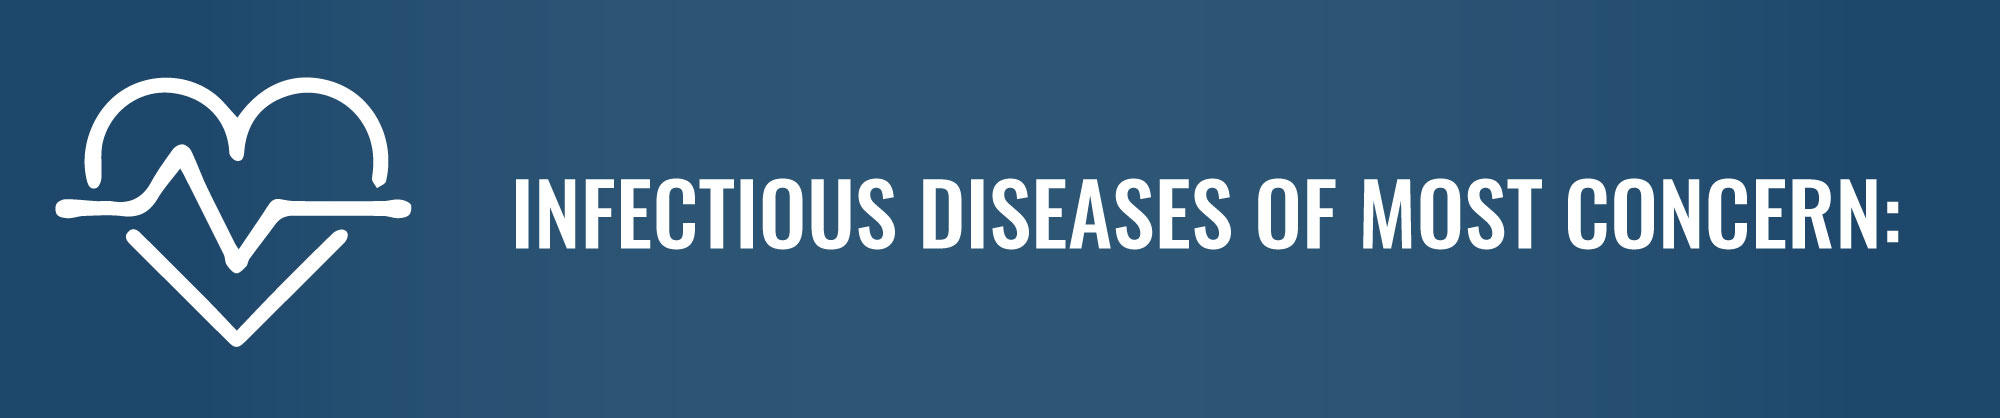 Infectious Diseases of Most Concern